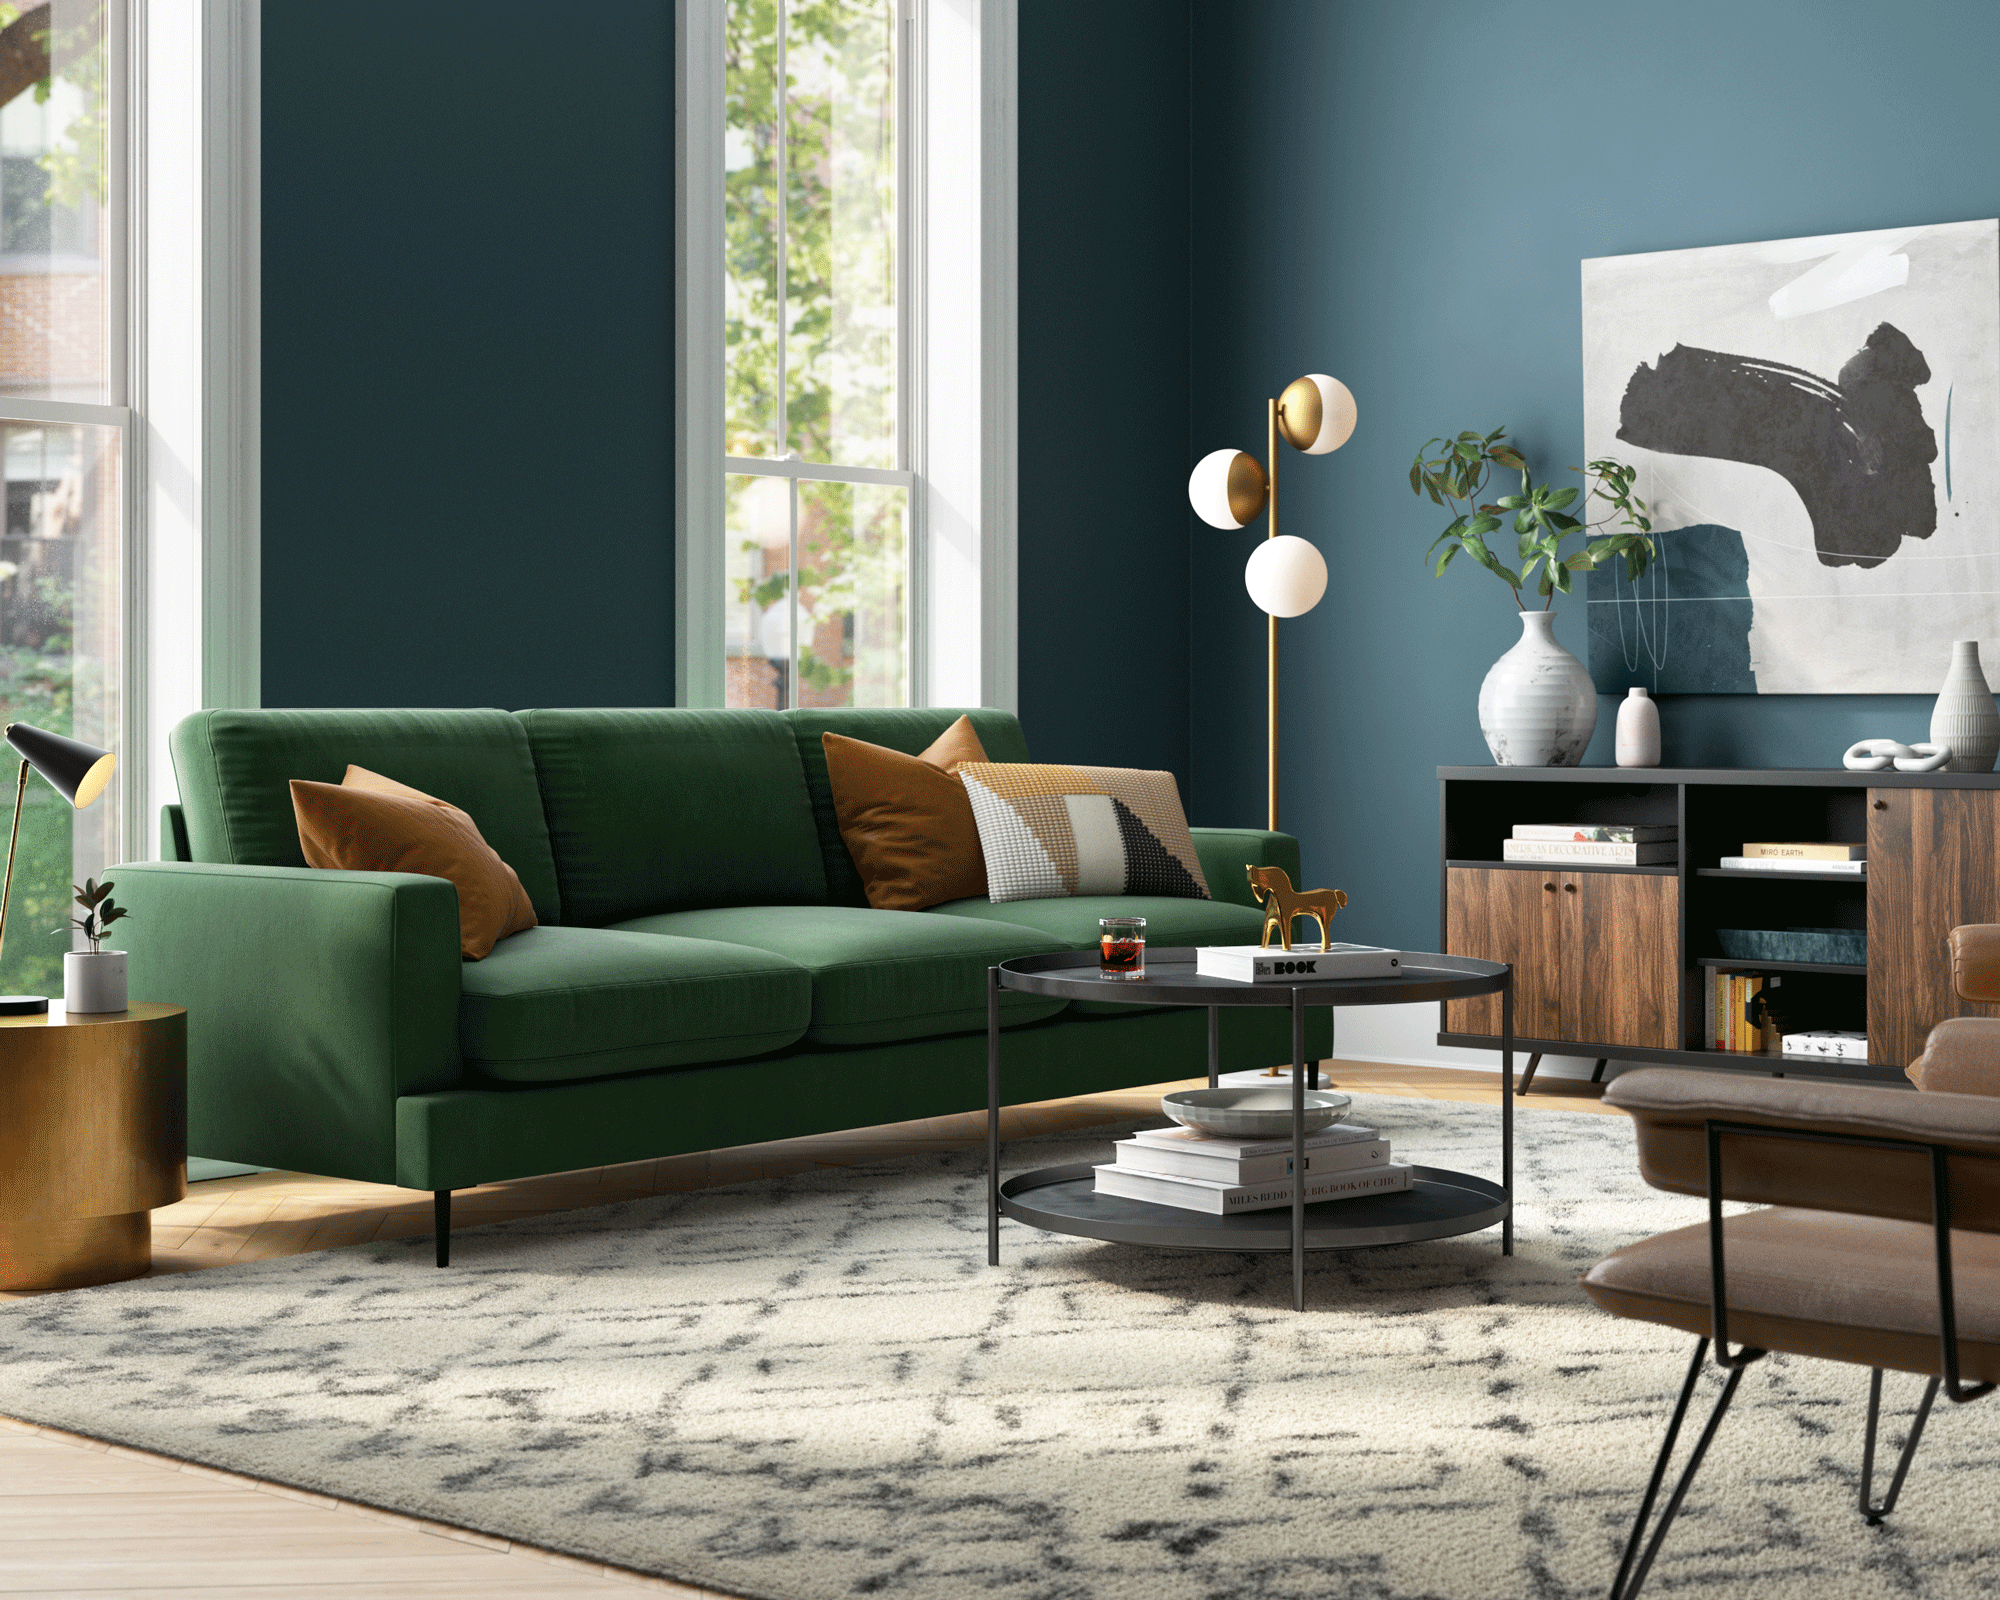 the living room color we're all obsessed with in 2022 | real homes